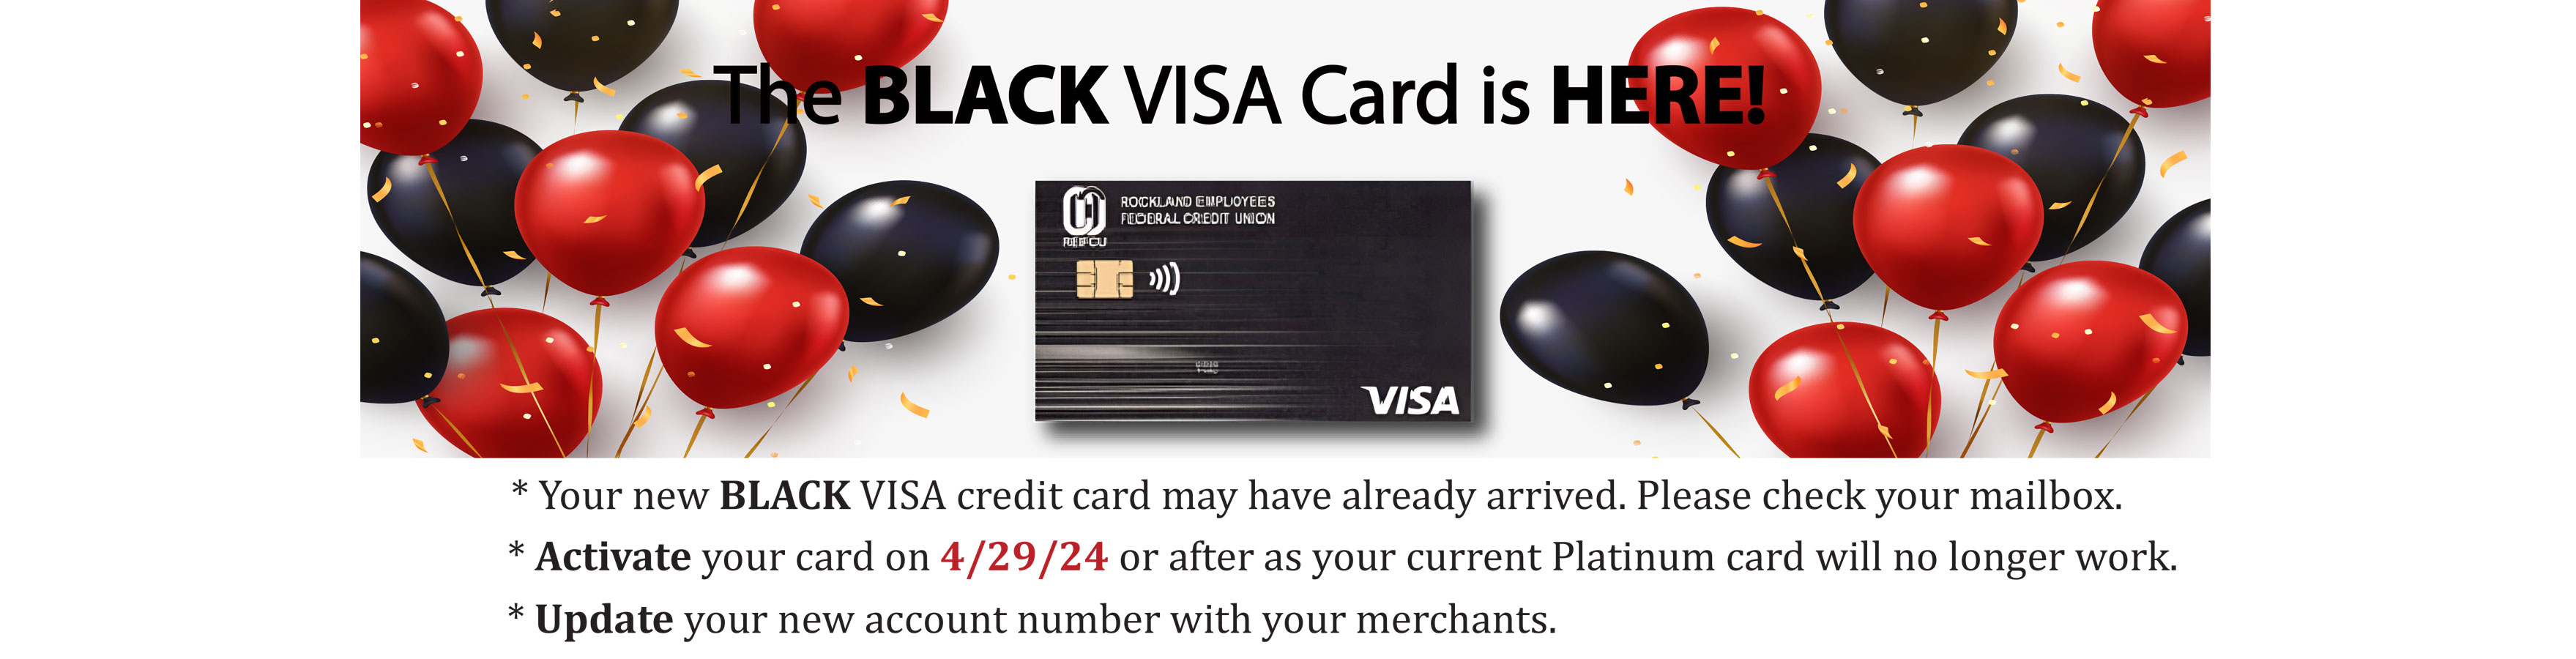 Your new BLACK VISA credit card may have already arrived. Please check your mailbox